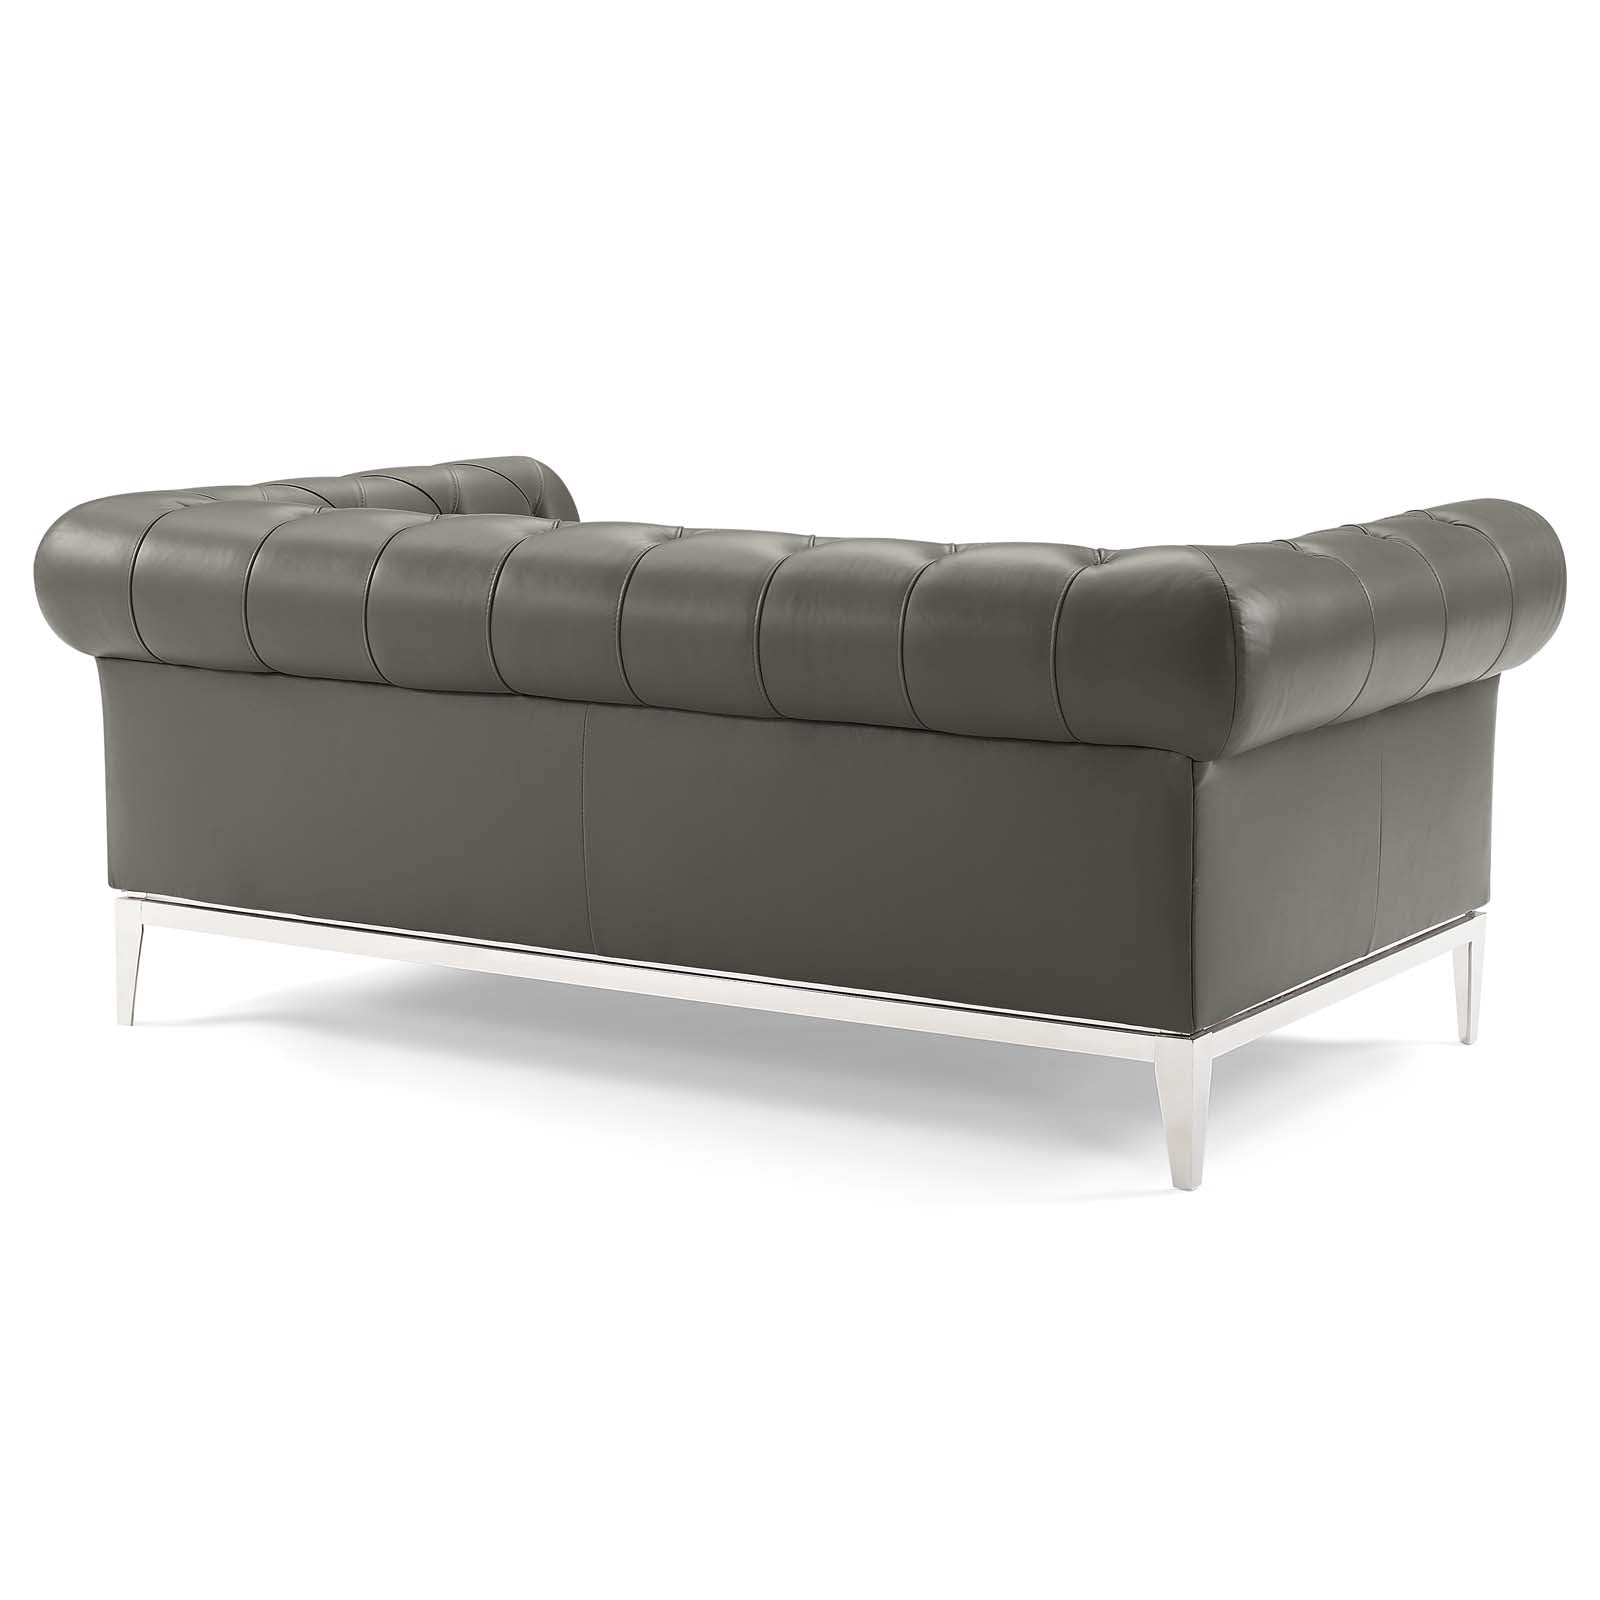 Modway Loveseats - Idyll Tufted Button Upholstered Leather Chesterfield Loveseat Gray